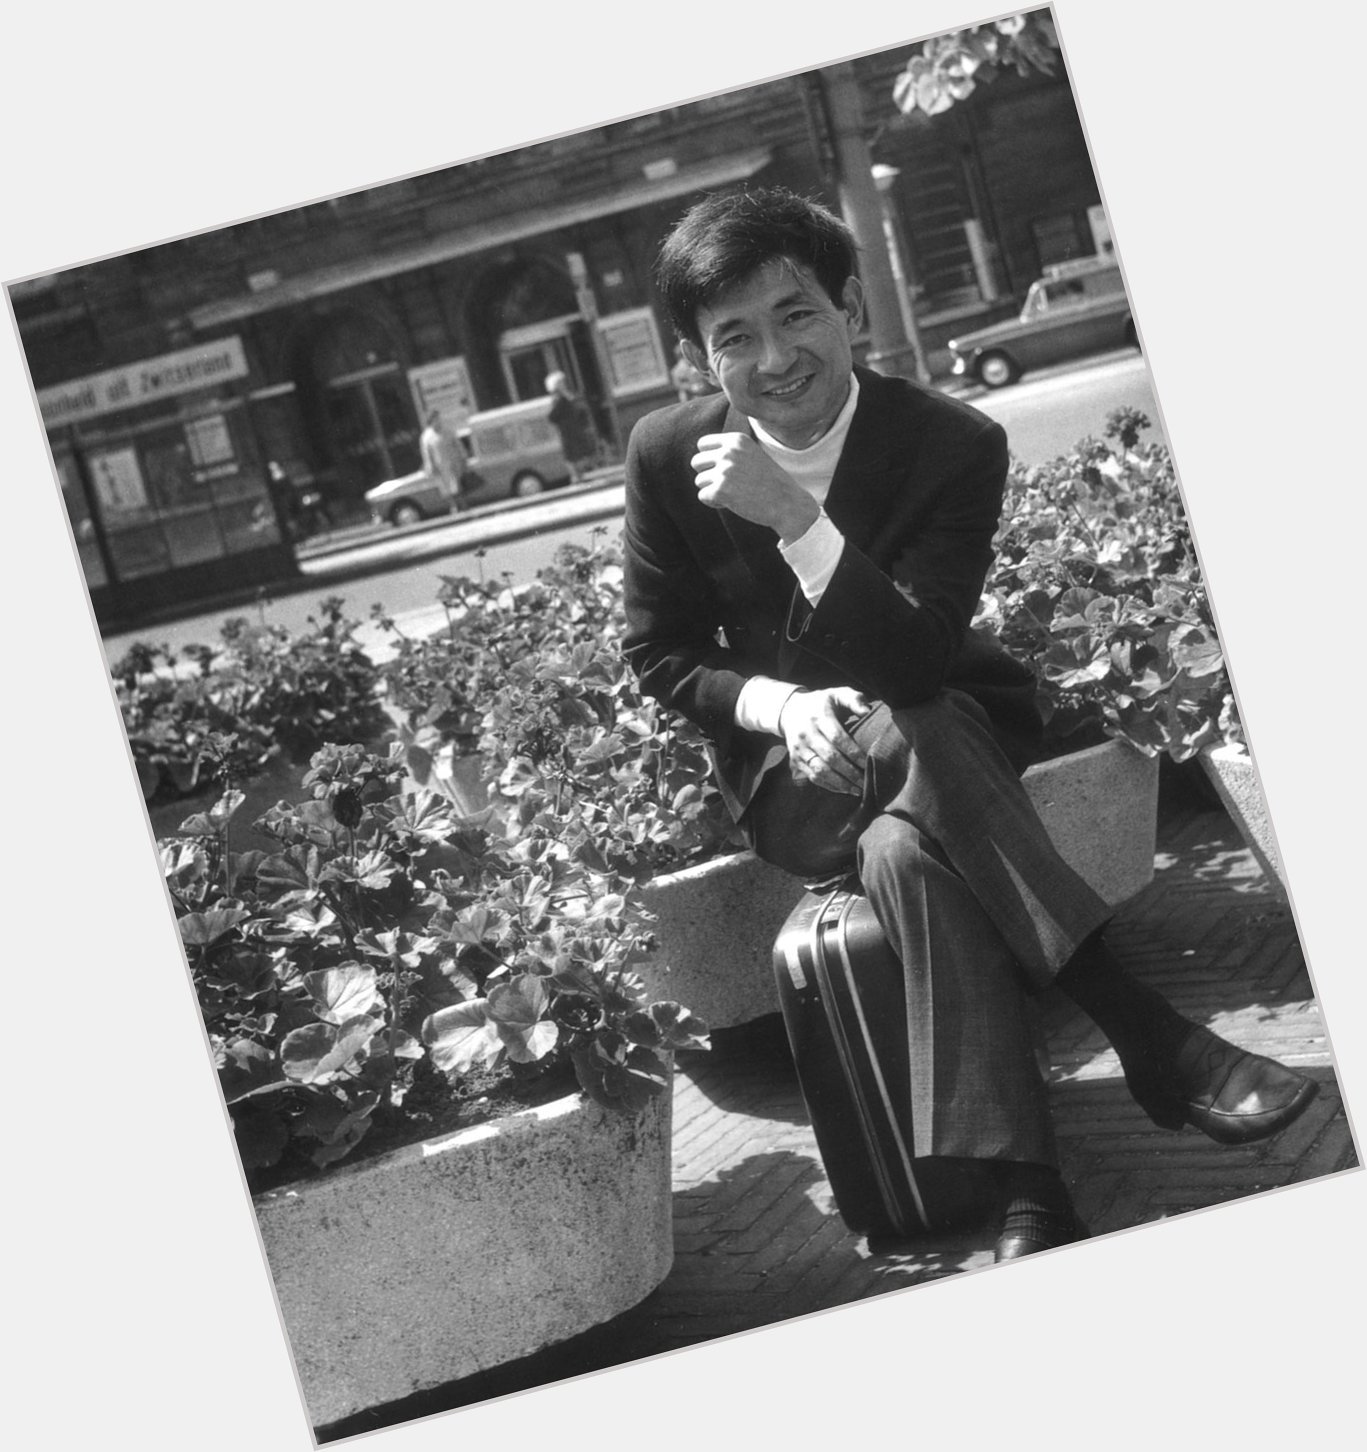 Happy birthday Seiji Ozawa! We love this archive picture of him outside the Concertgebouw in Amsterdam 